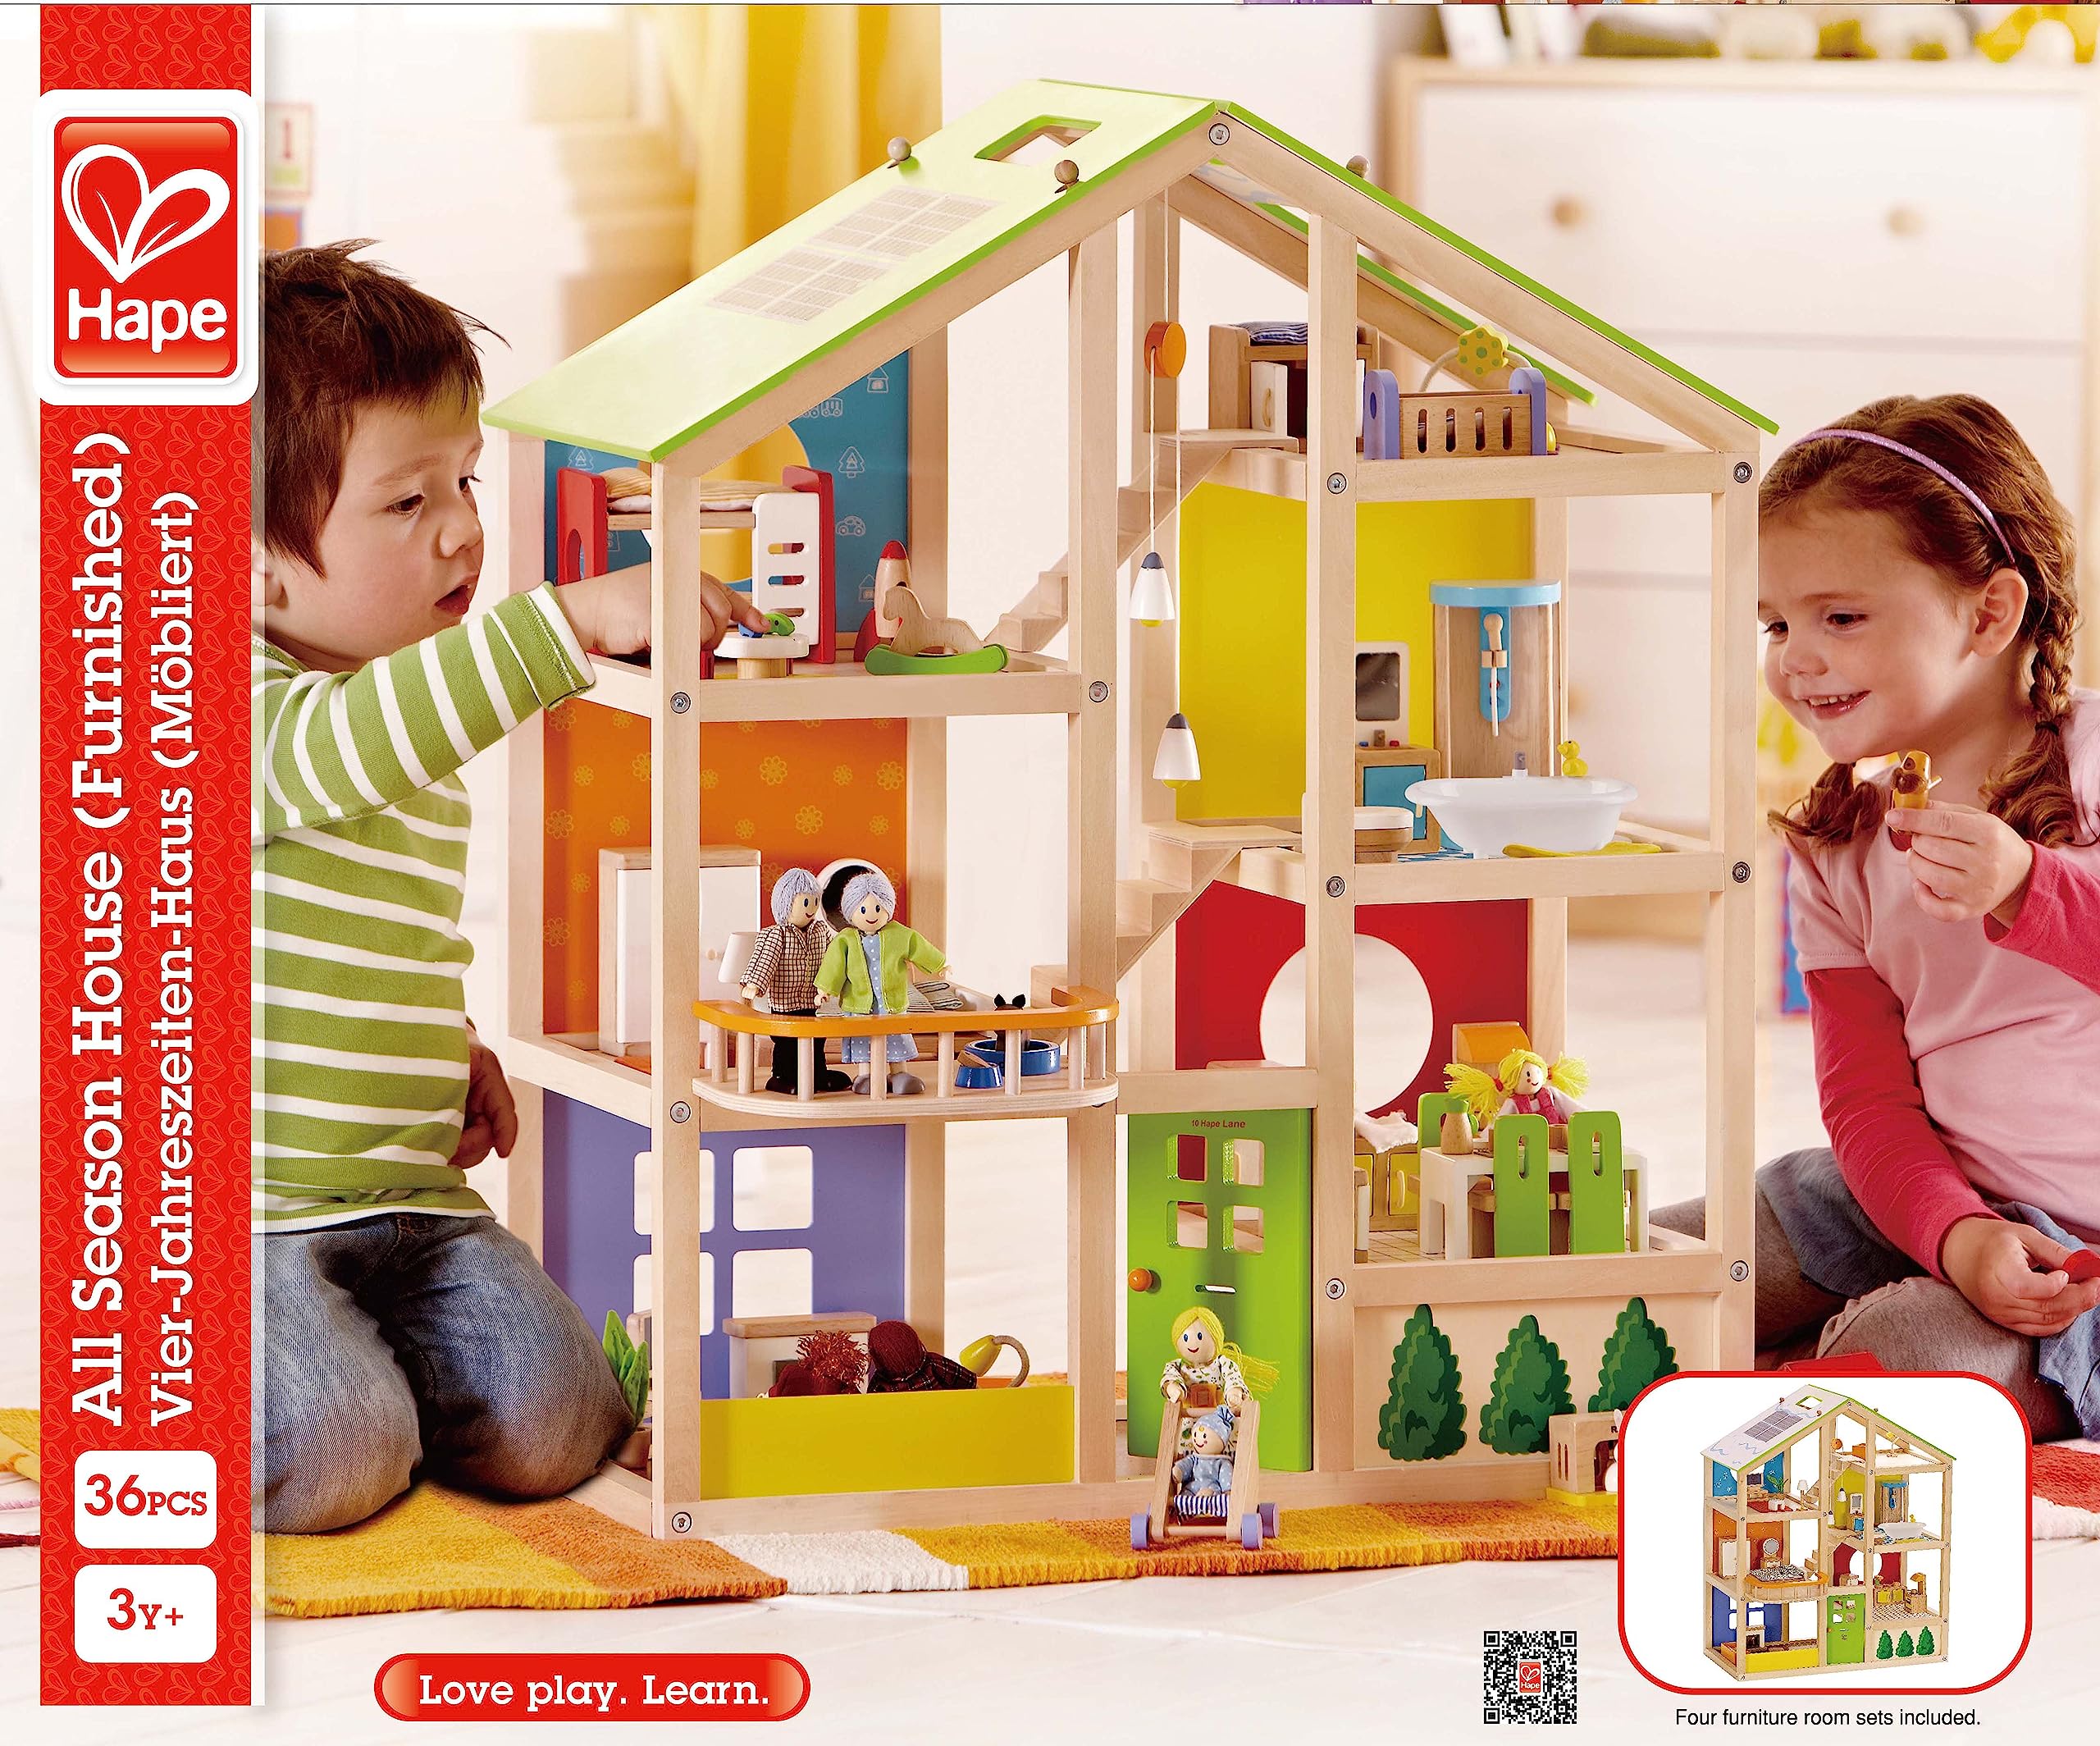 All Seasons Kids Wooden Dollhouse by Hape | Award Winning 3 Story Dolls House Toy with Furniture, Accessories, Movable Stairs and Reversible Season Theme L: 23.6, W: 11.8, H: 28.9 inch